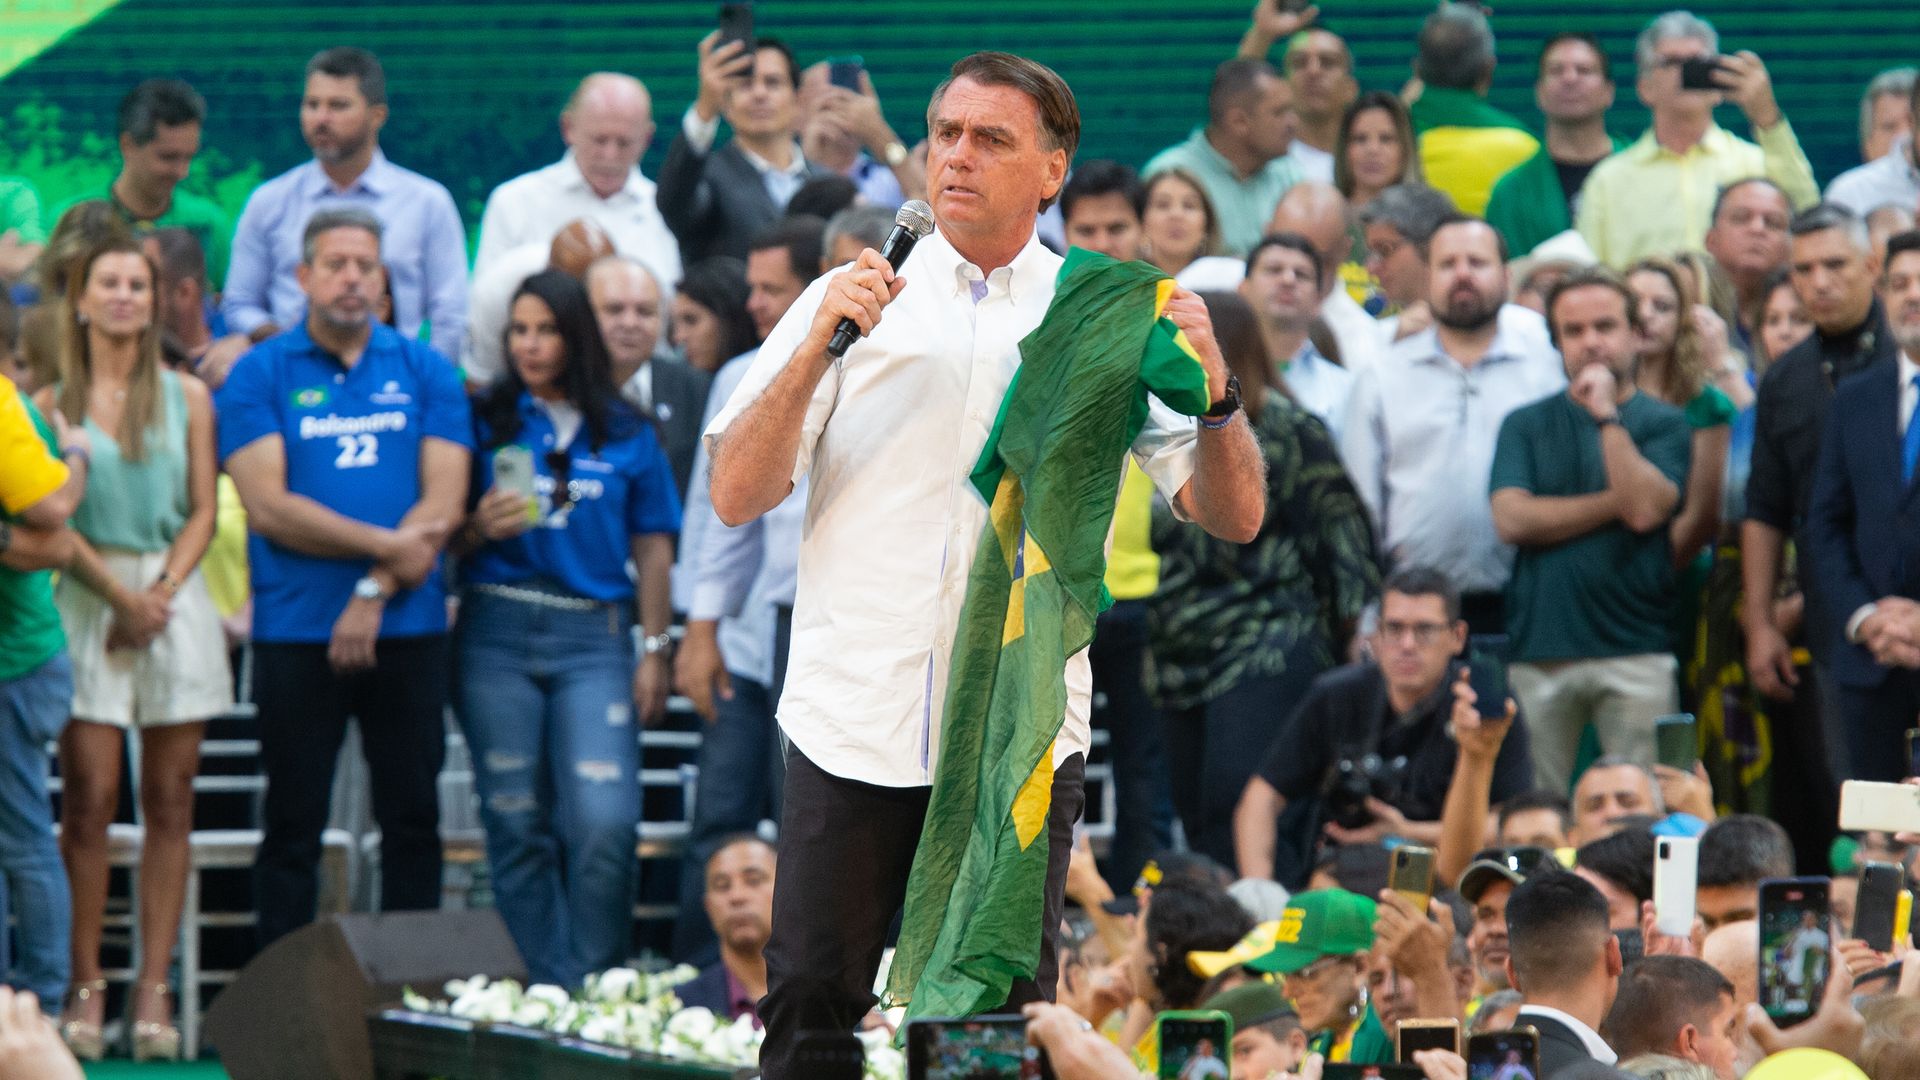 Brazil President Jair Bolsonaro holds up a Brazilian flag while speaking at a rally this weekend. He is surrounded by people 